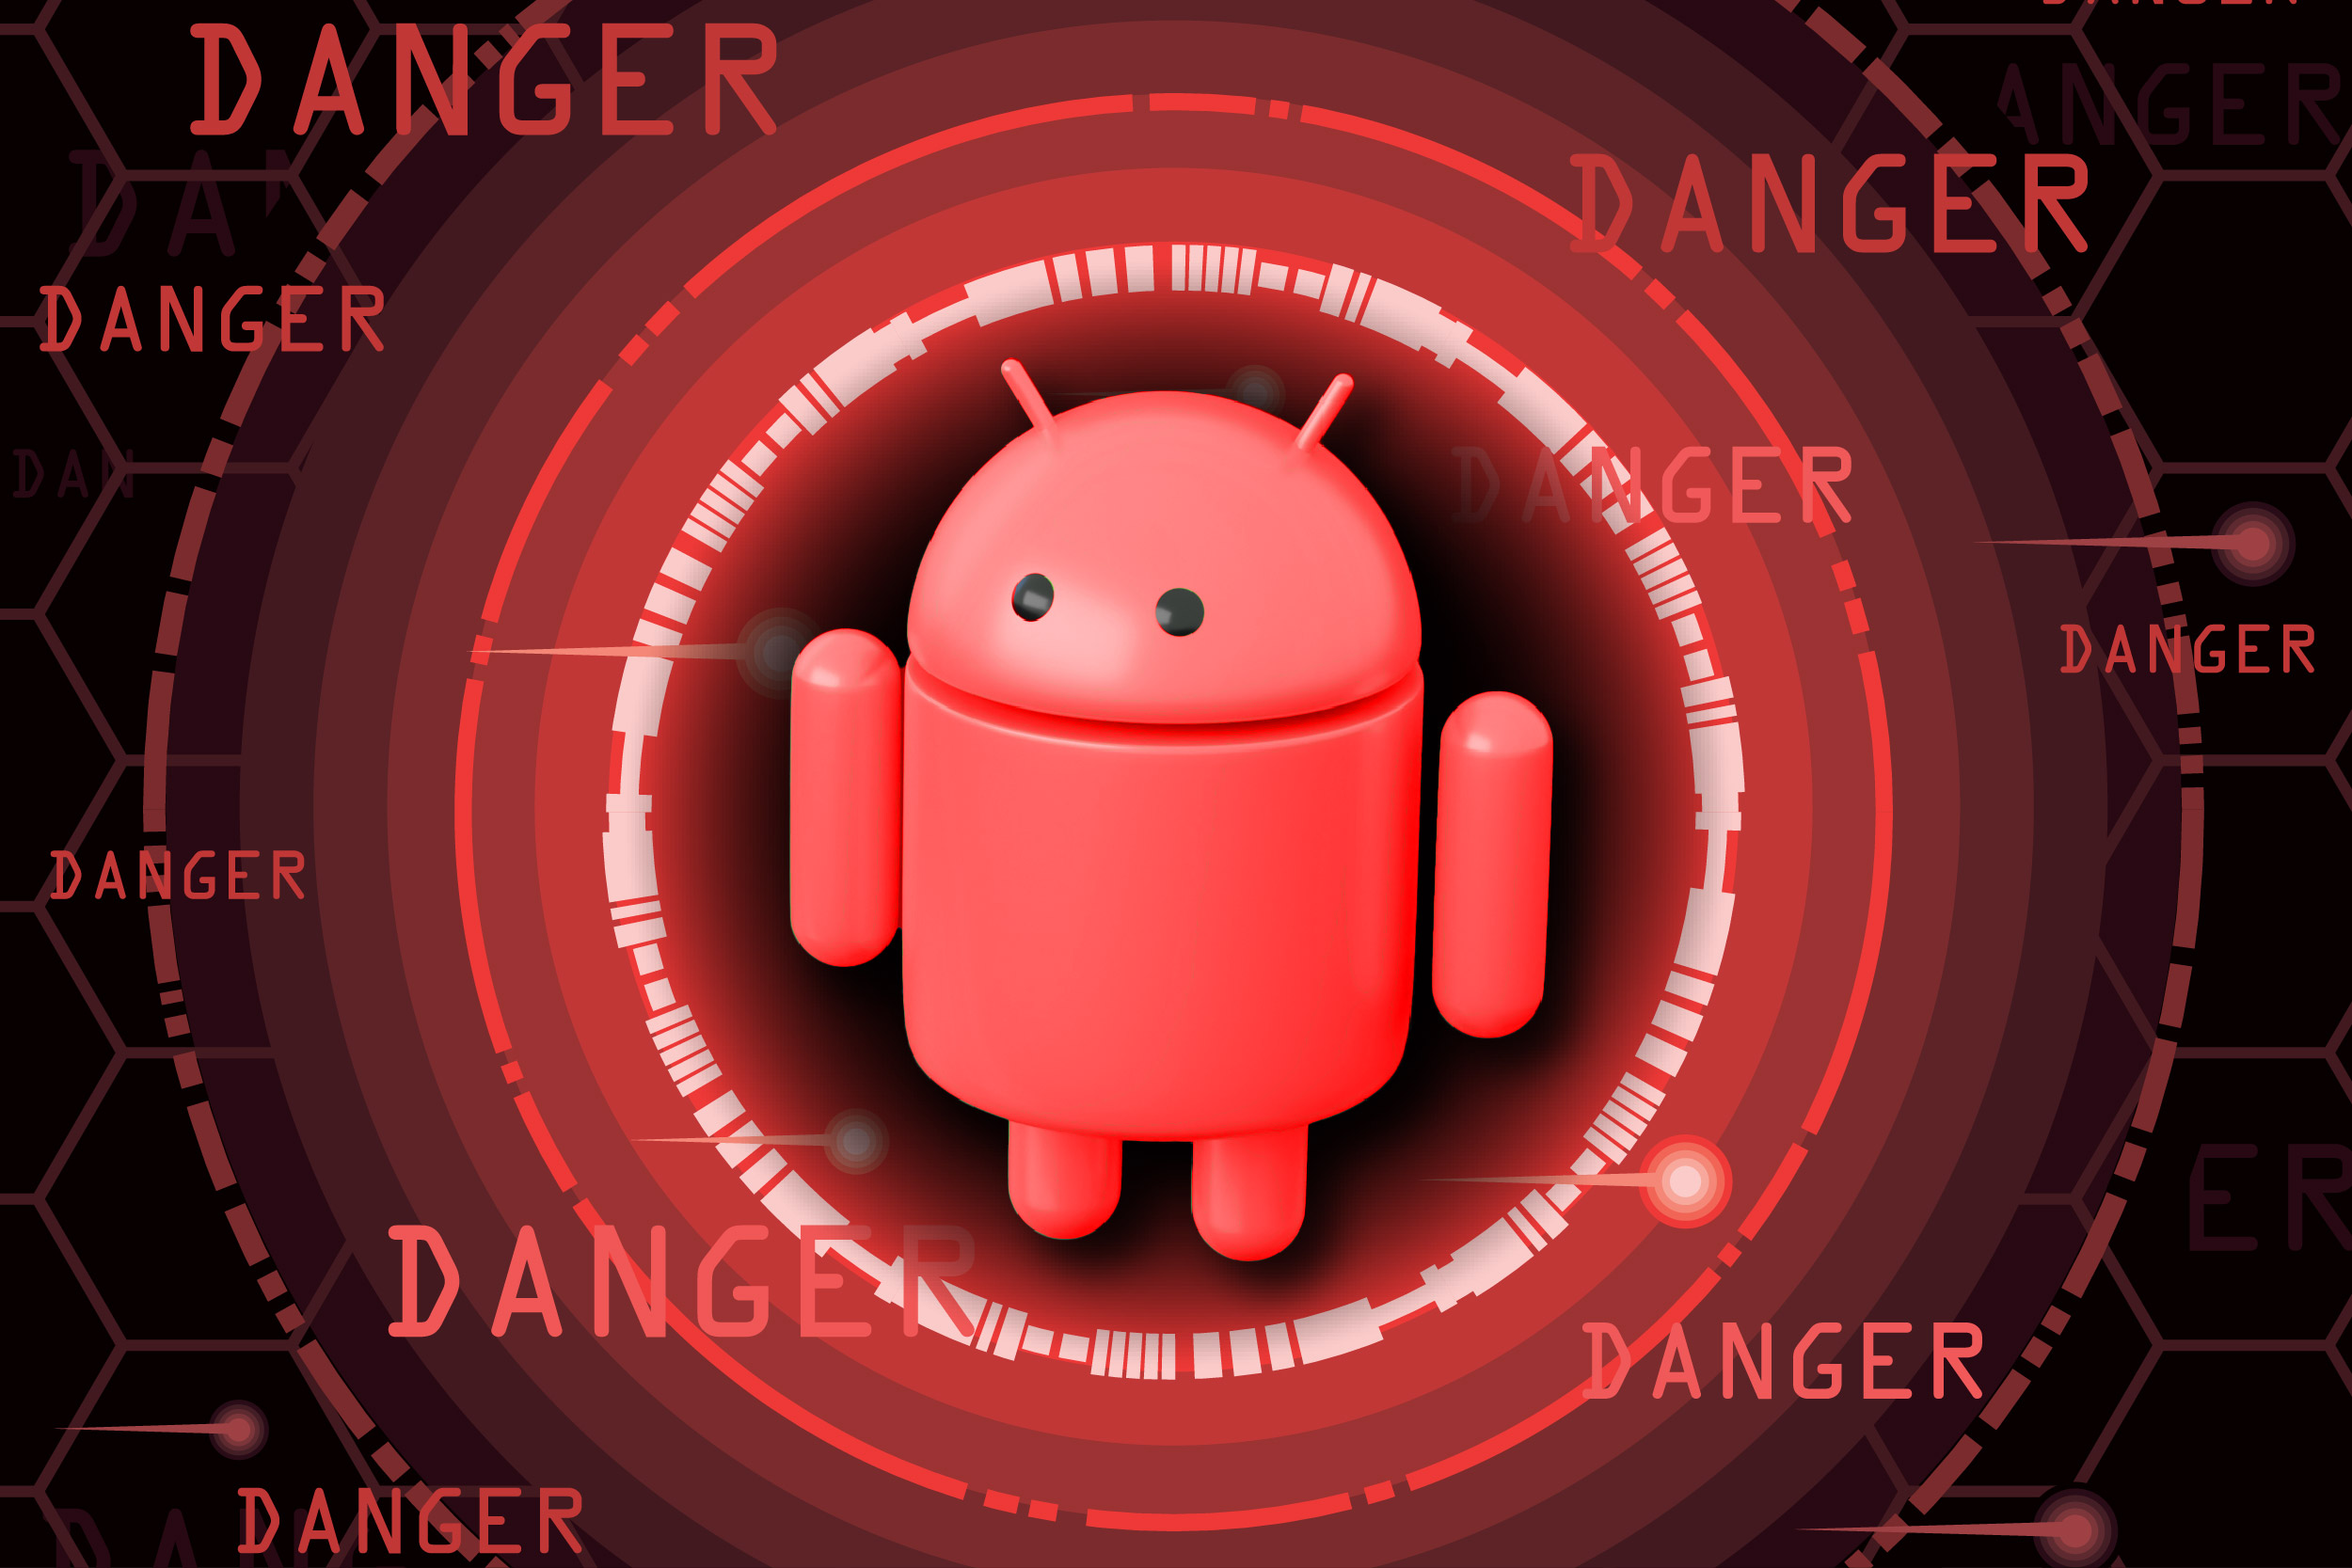 2023 Alliance Shield X APK for Android Free Download in harmful